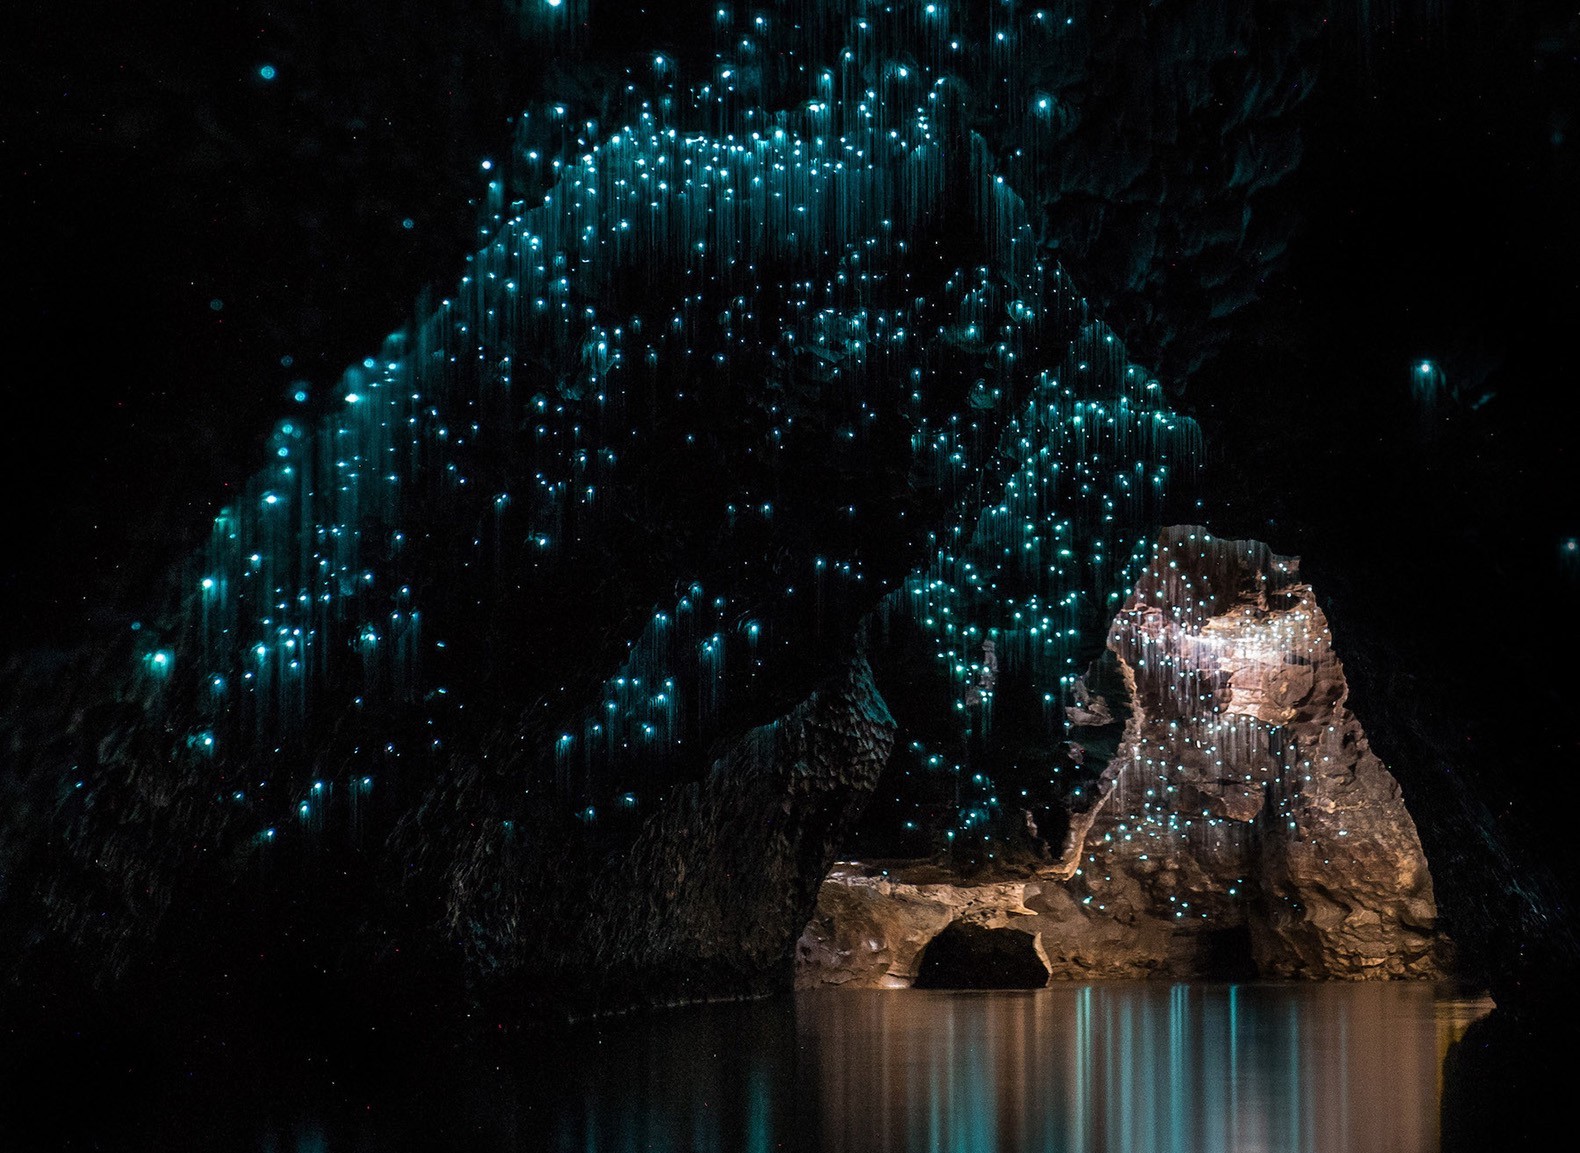 You got: Glowworm Caves in Waitomo, New Zealand! 🎢 Spend a Day in Universal Studios and We’ll Give You a Surreal Place to Visit